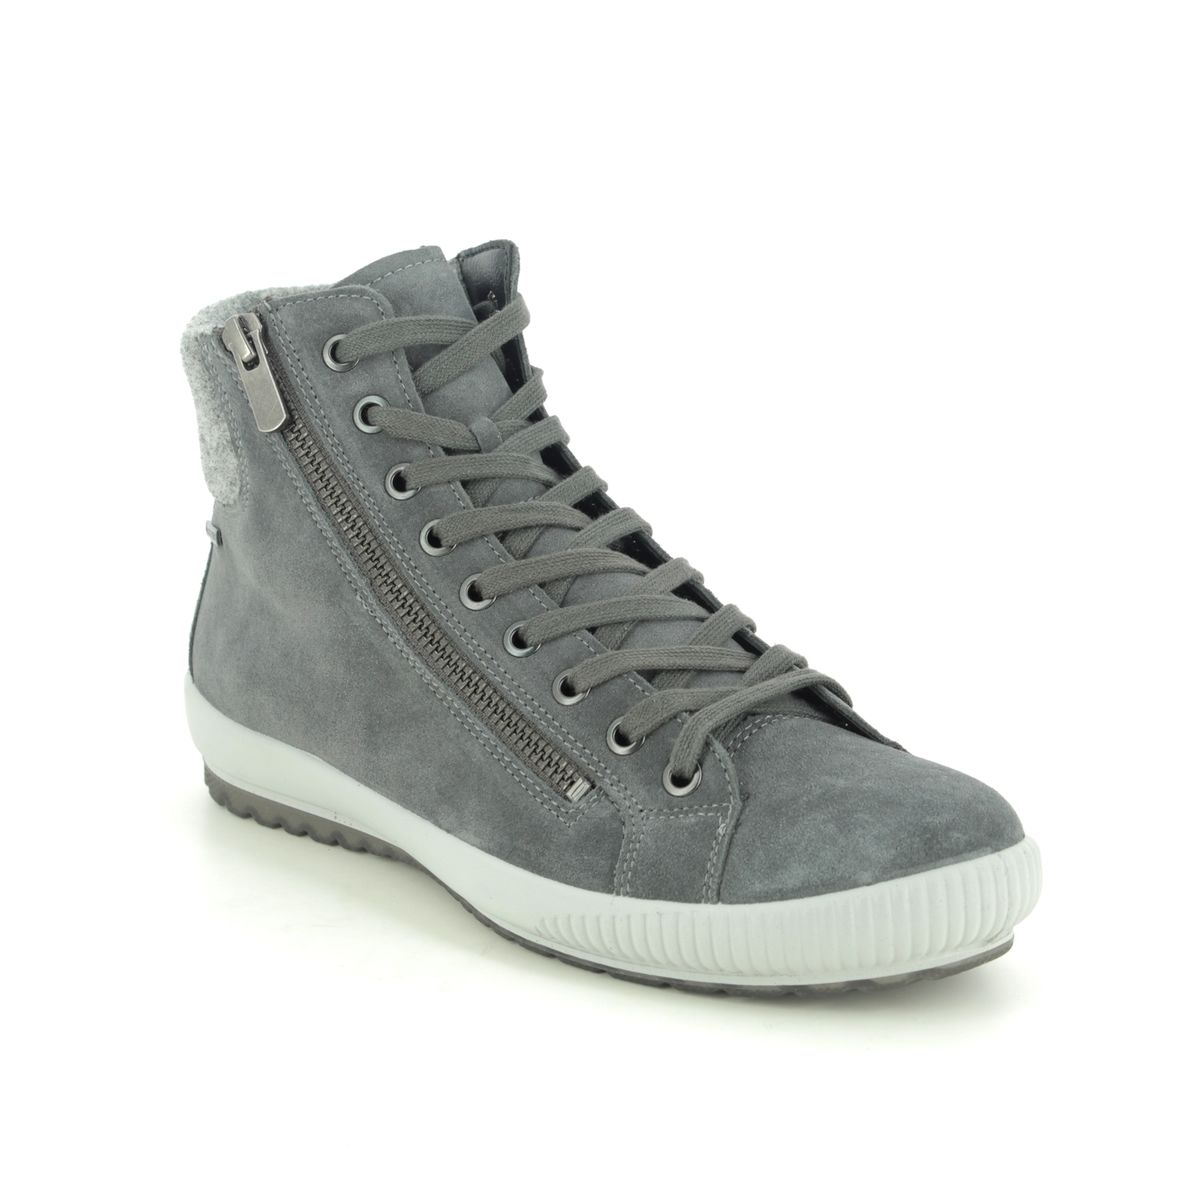 Legero Tanaro Hi Gore Grey Suede Womens Lace Up Boots 2009614-2200 In Size 4.5 In Plain Grey Suede